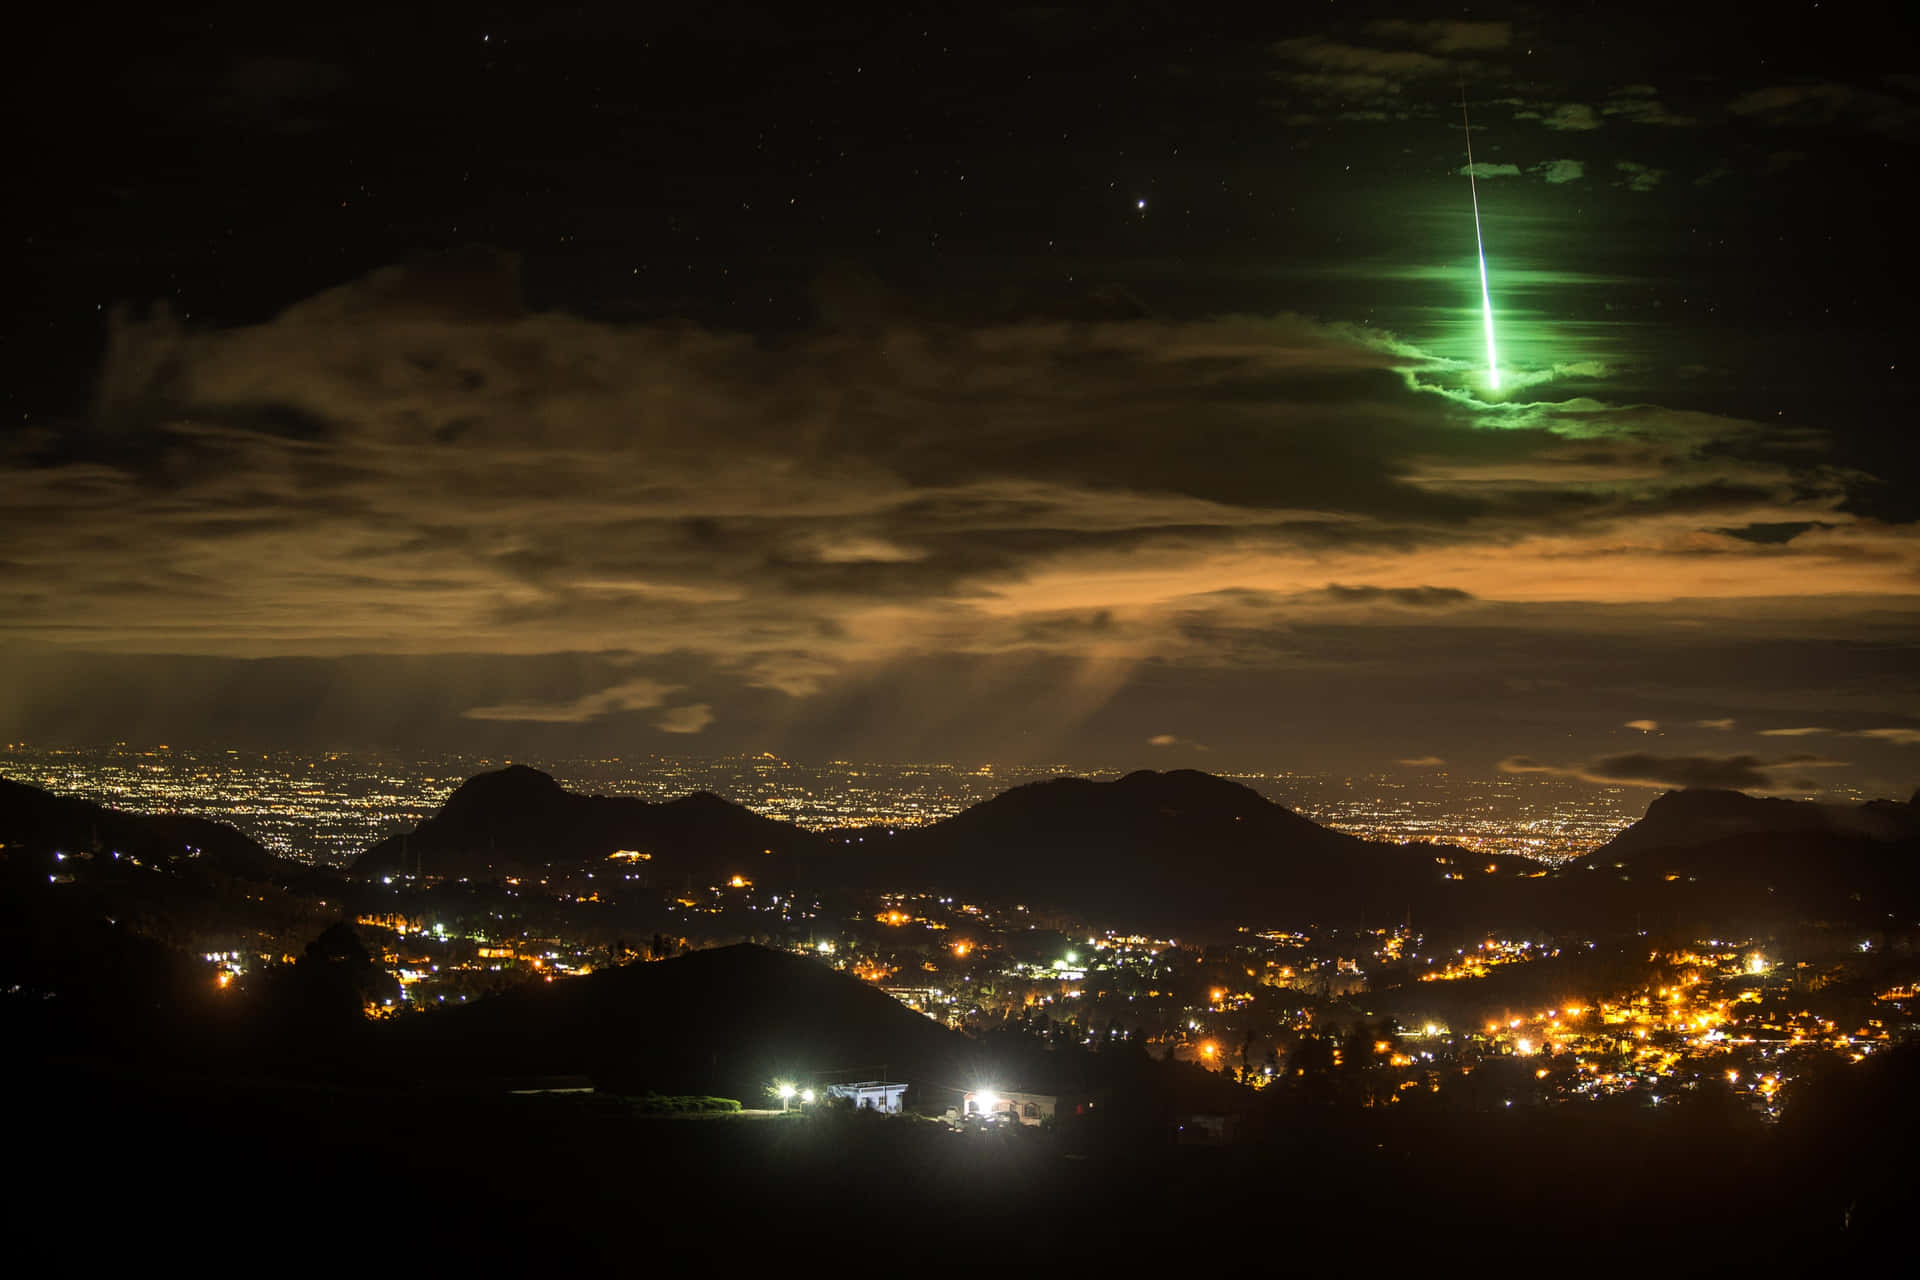 Witness the beauty of a meteor streaking through the night's sky